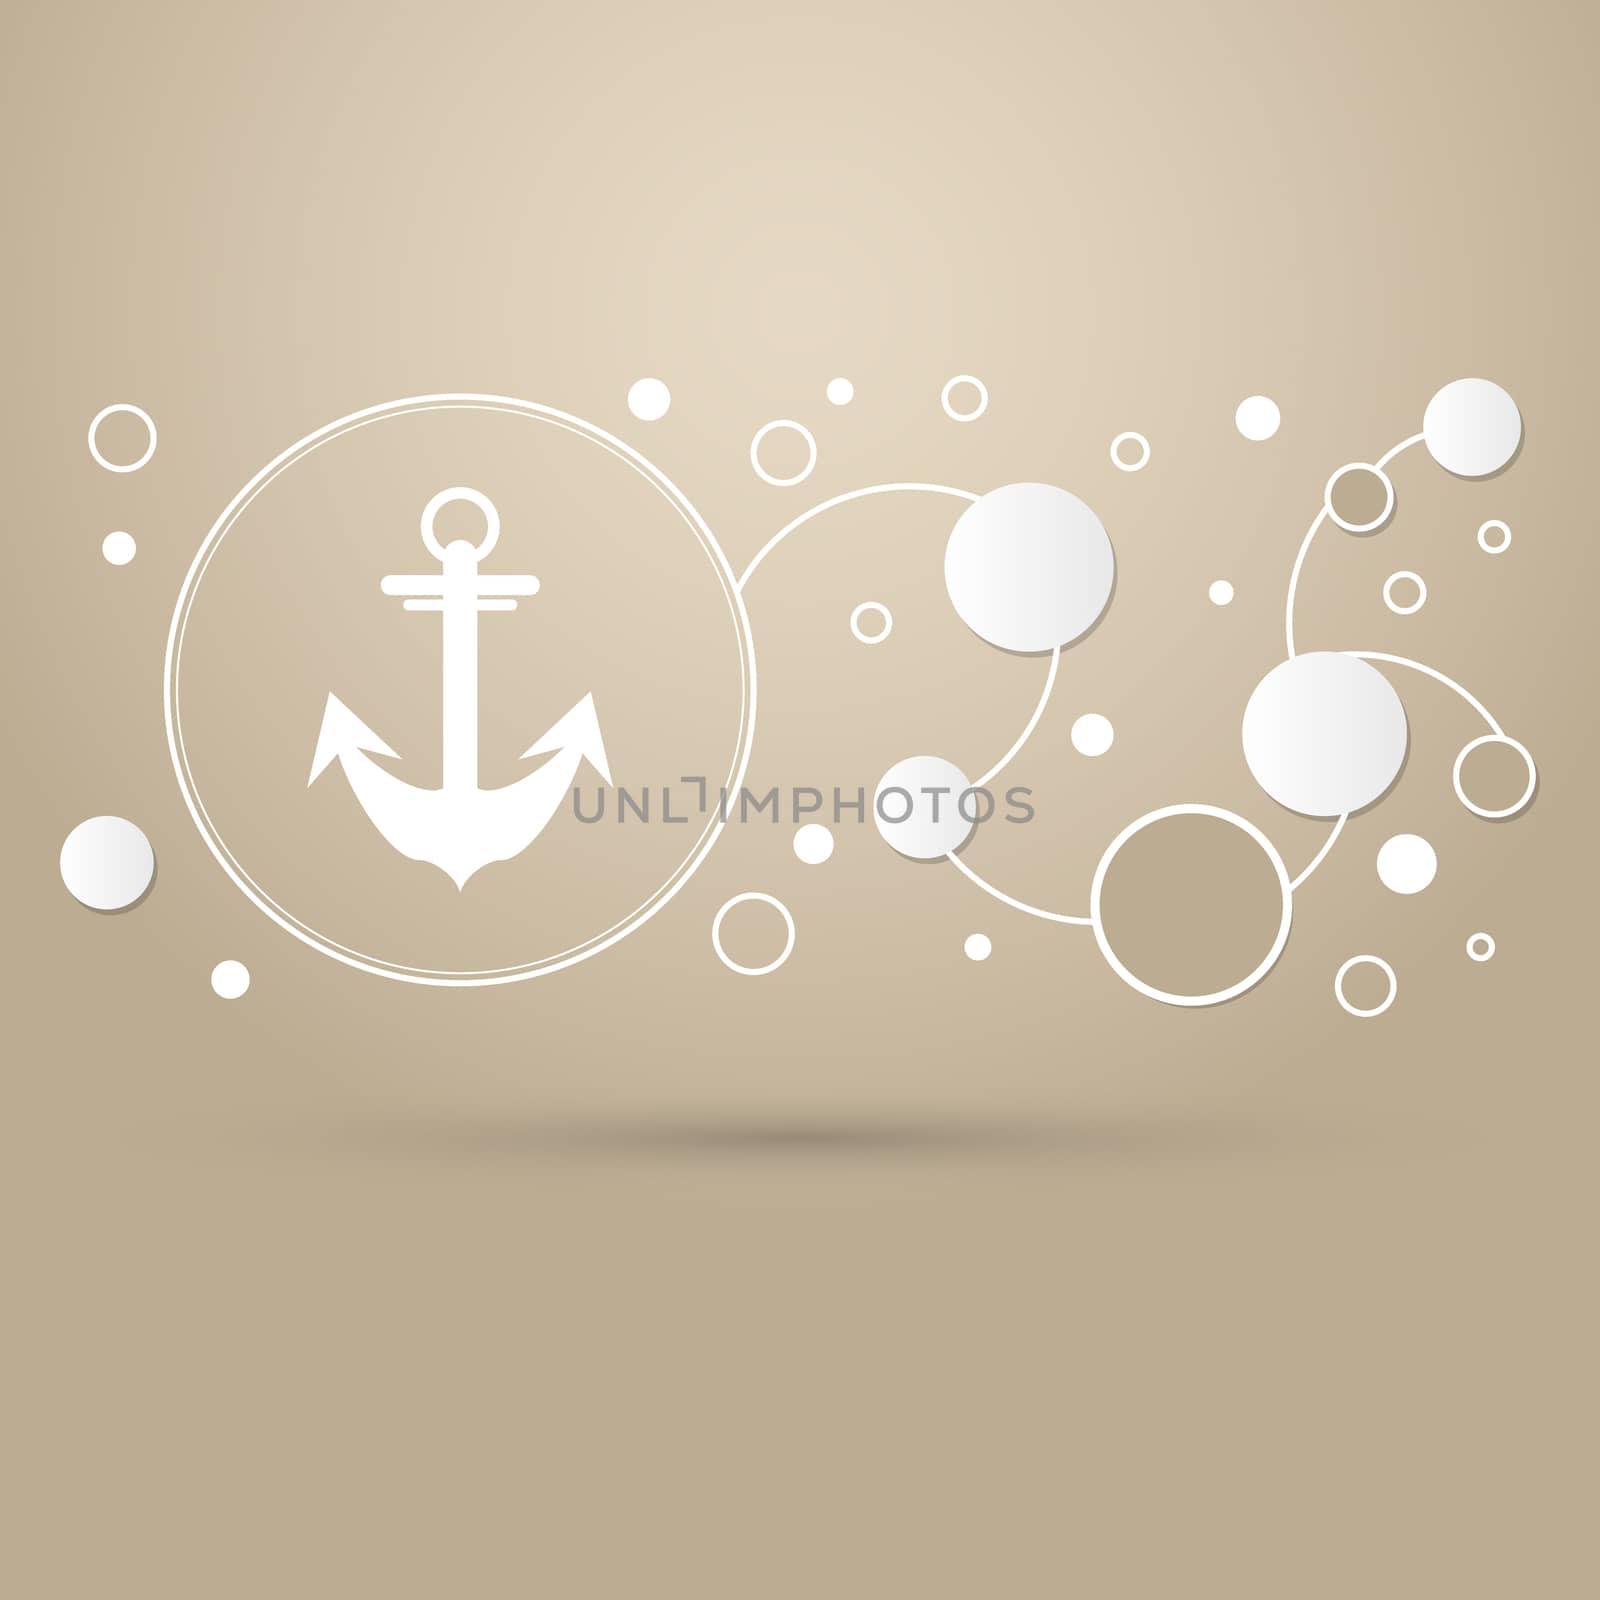 Anchor icon on a brown background with elegant style and modern design infographic. illustration